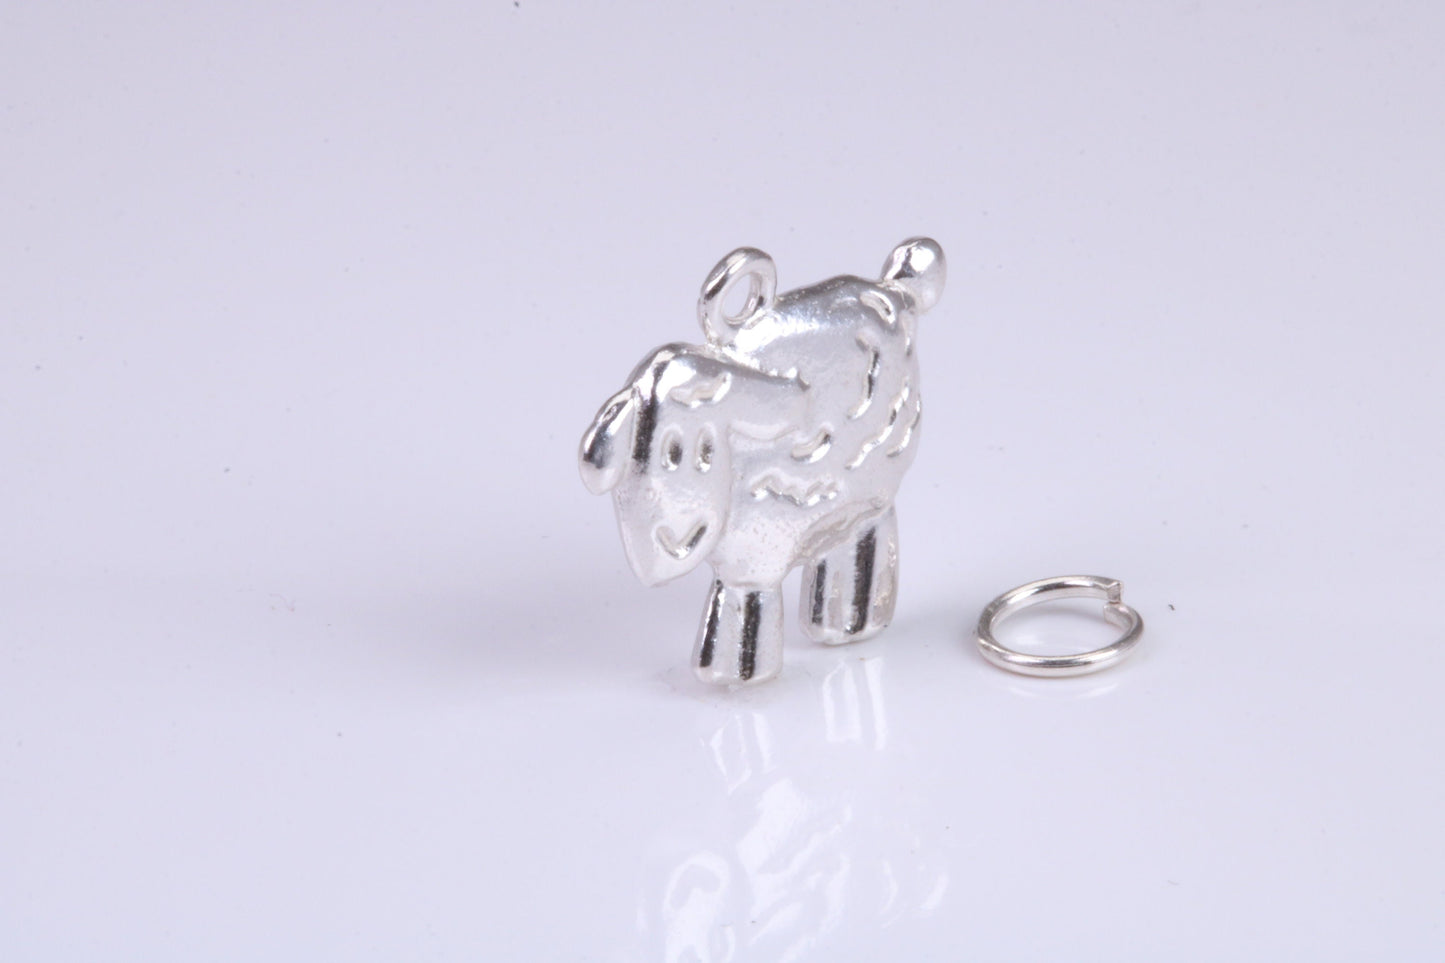 Sheep Charm, Traditional Charm, Made from Solid 925 Grade Sterling Silver, Complete with Attachment Link